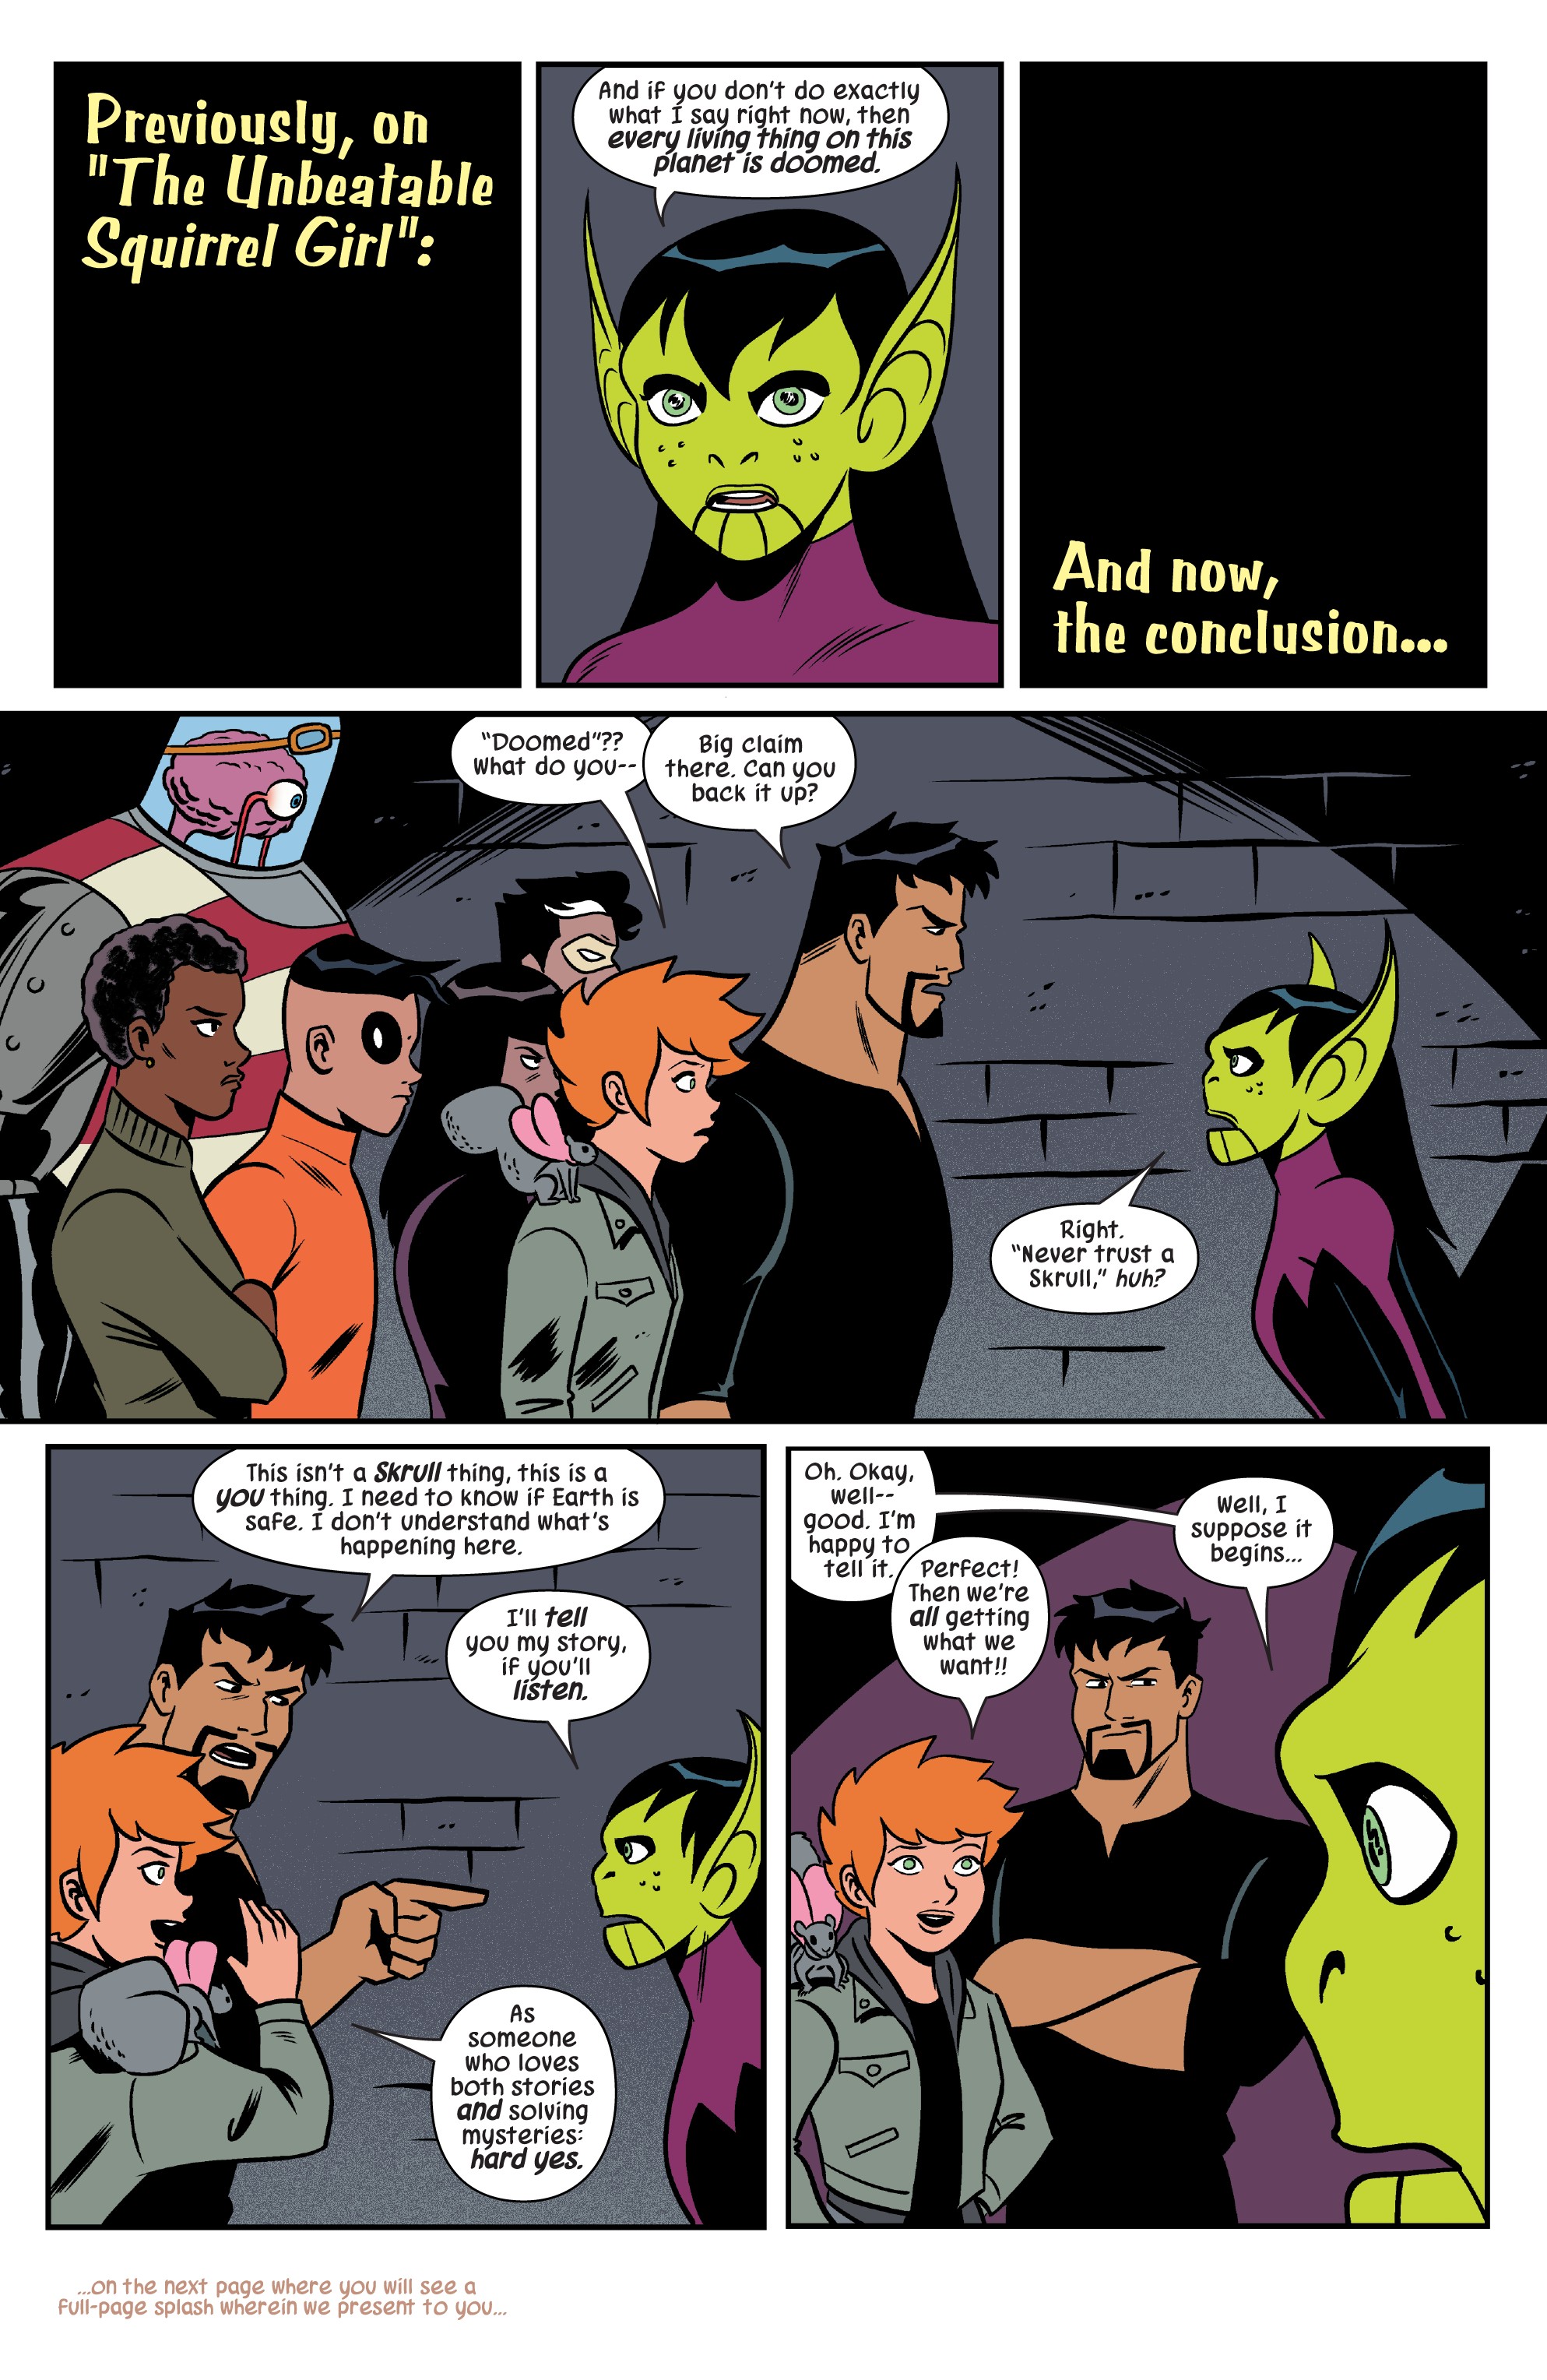 The Unbeatable Squirrel Girl Vol. 2 (2015): Chapter 40 - Page 4